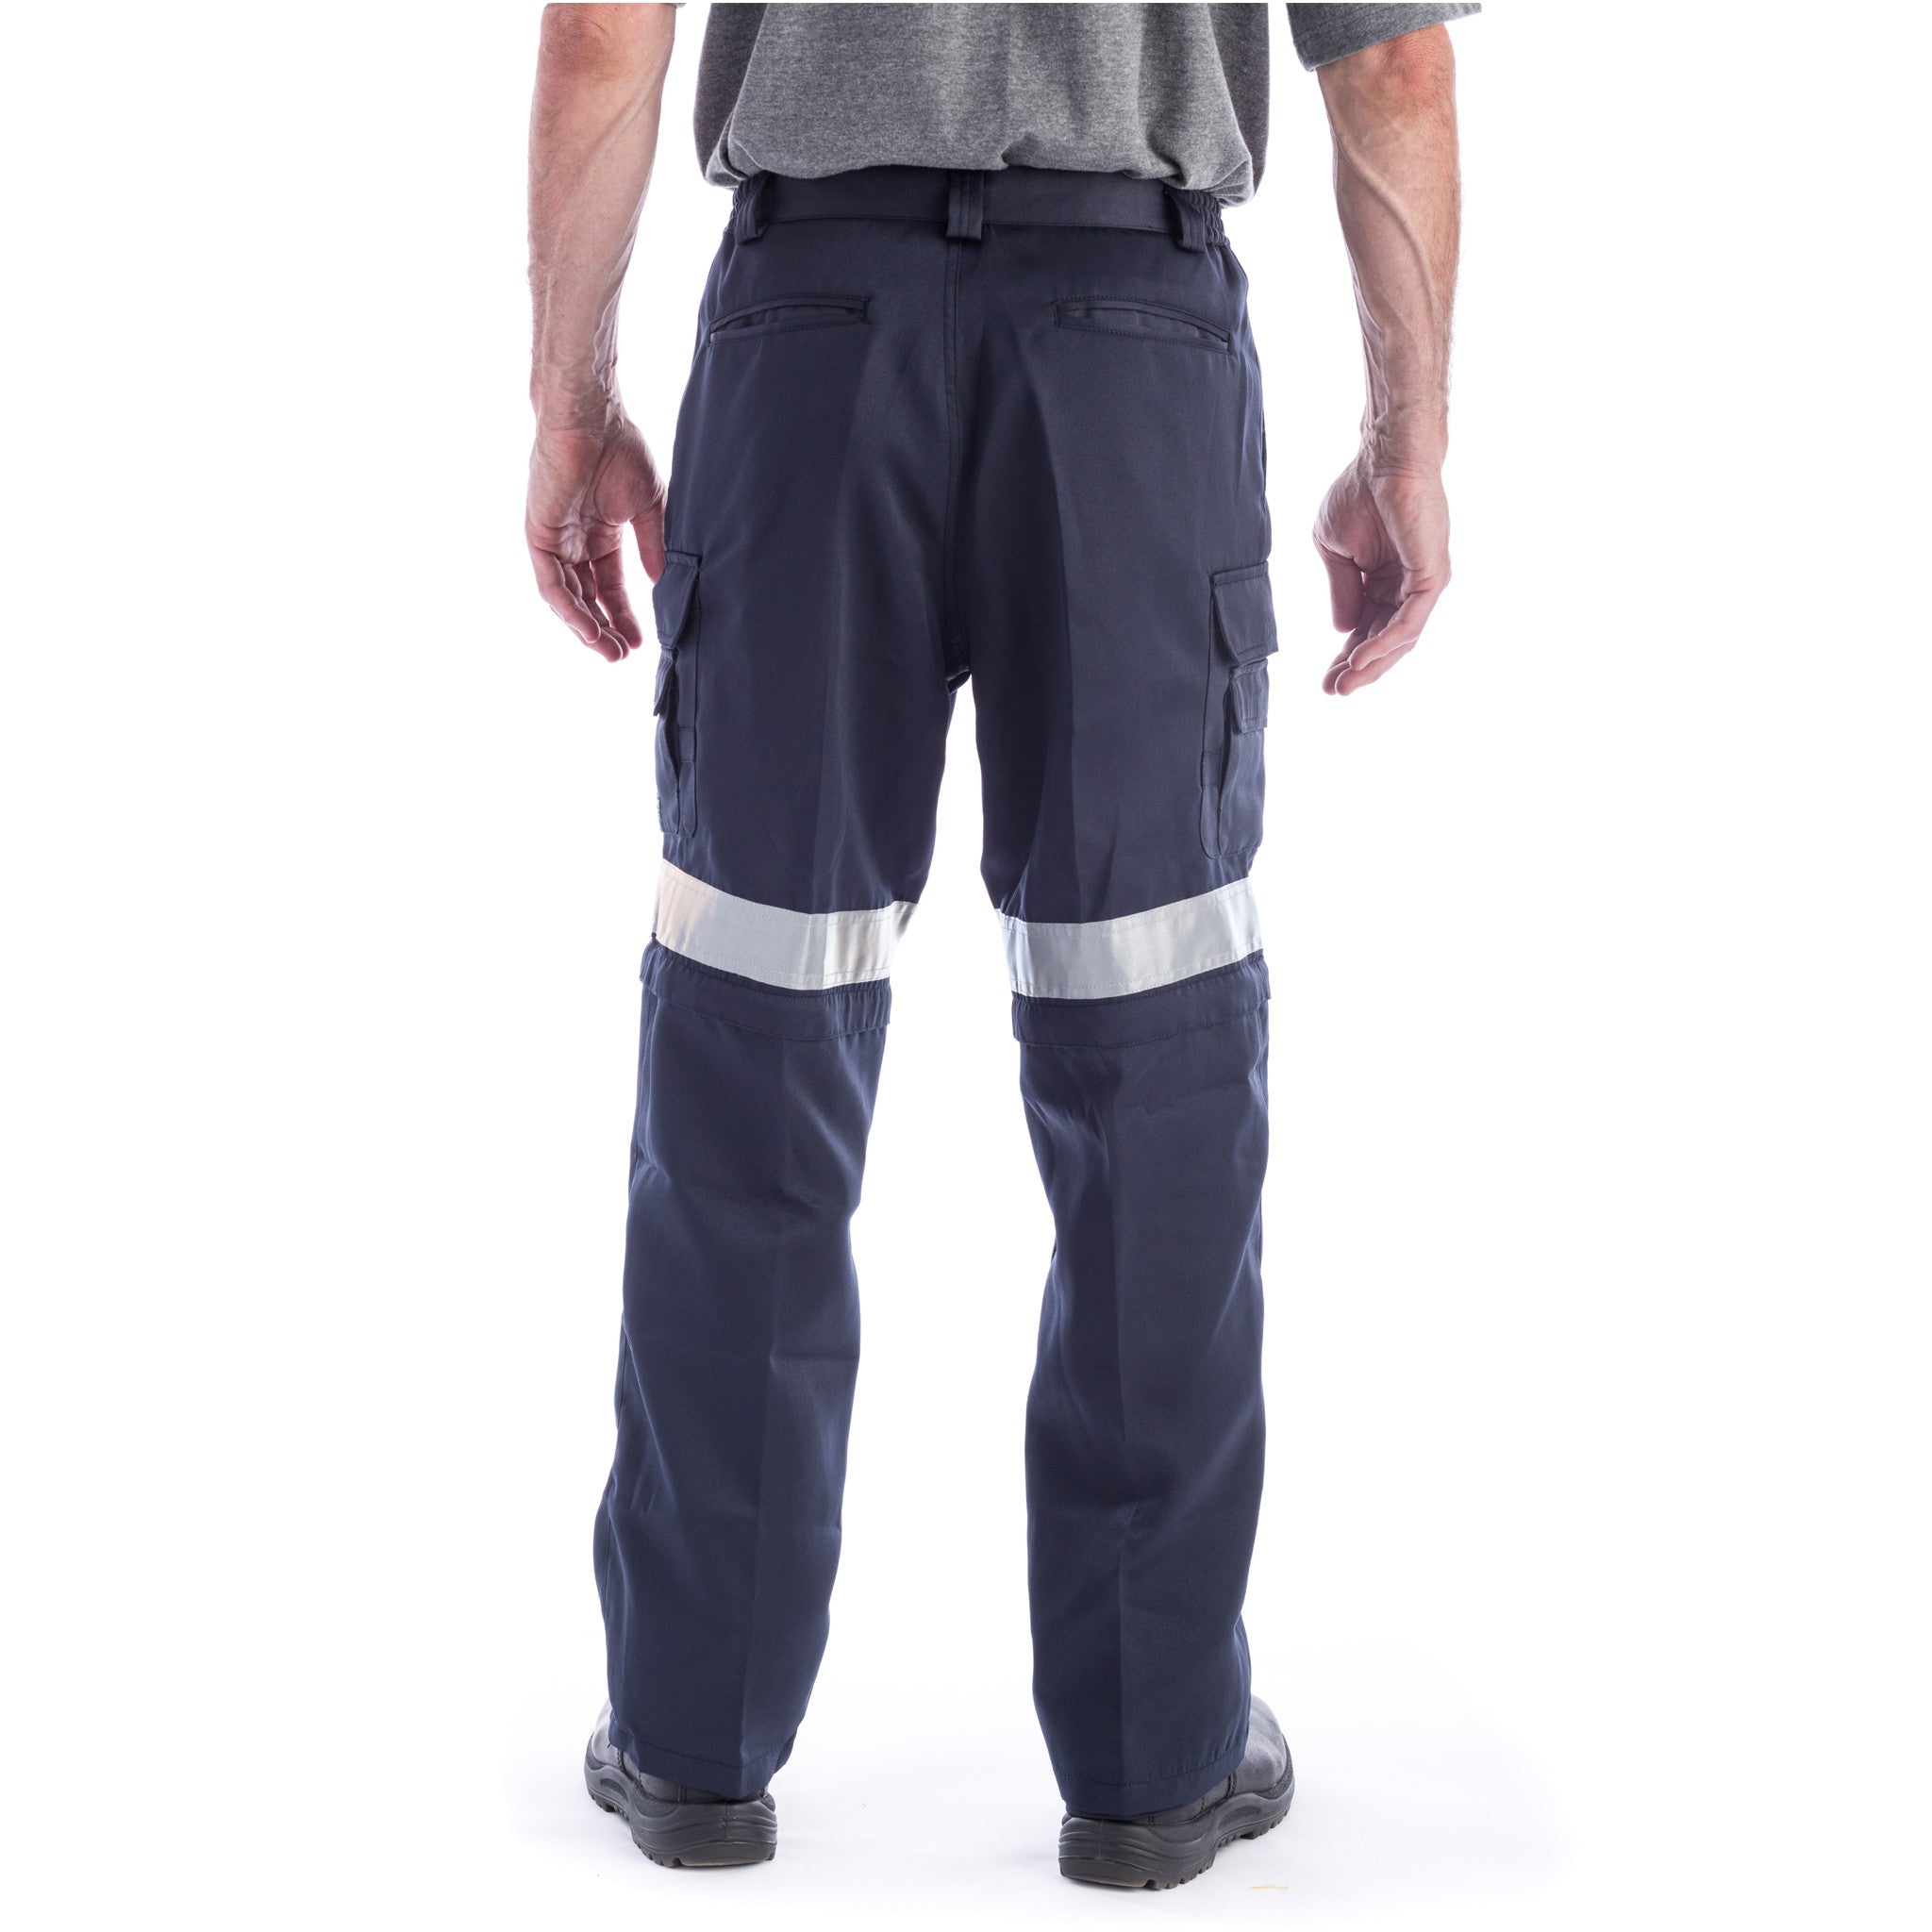 Work Pants For Men Multifunctional Work Trousers Workwear Pants With  Reflective Tapes